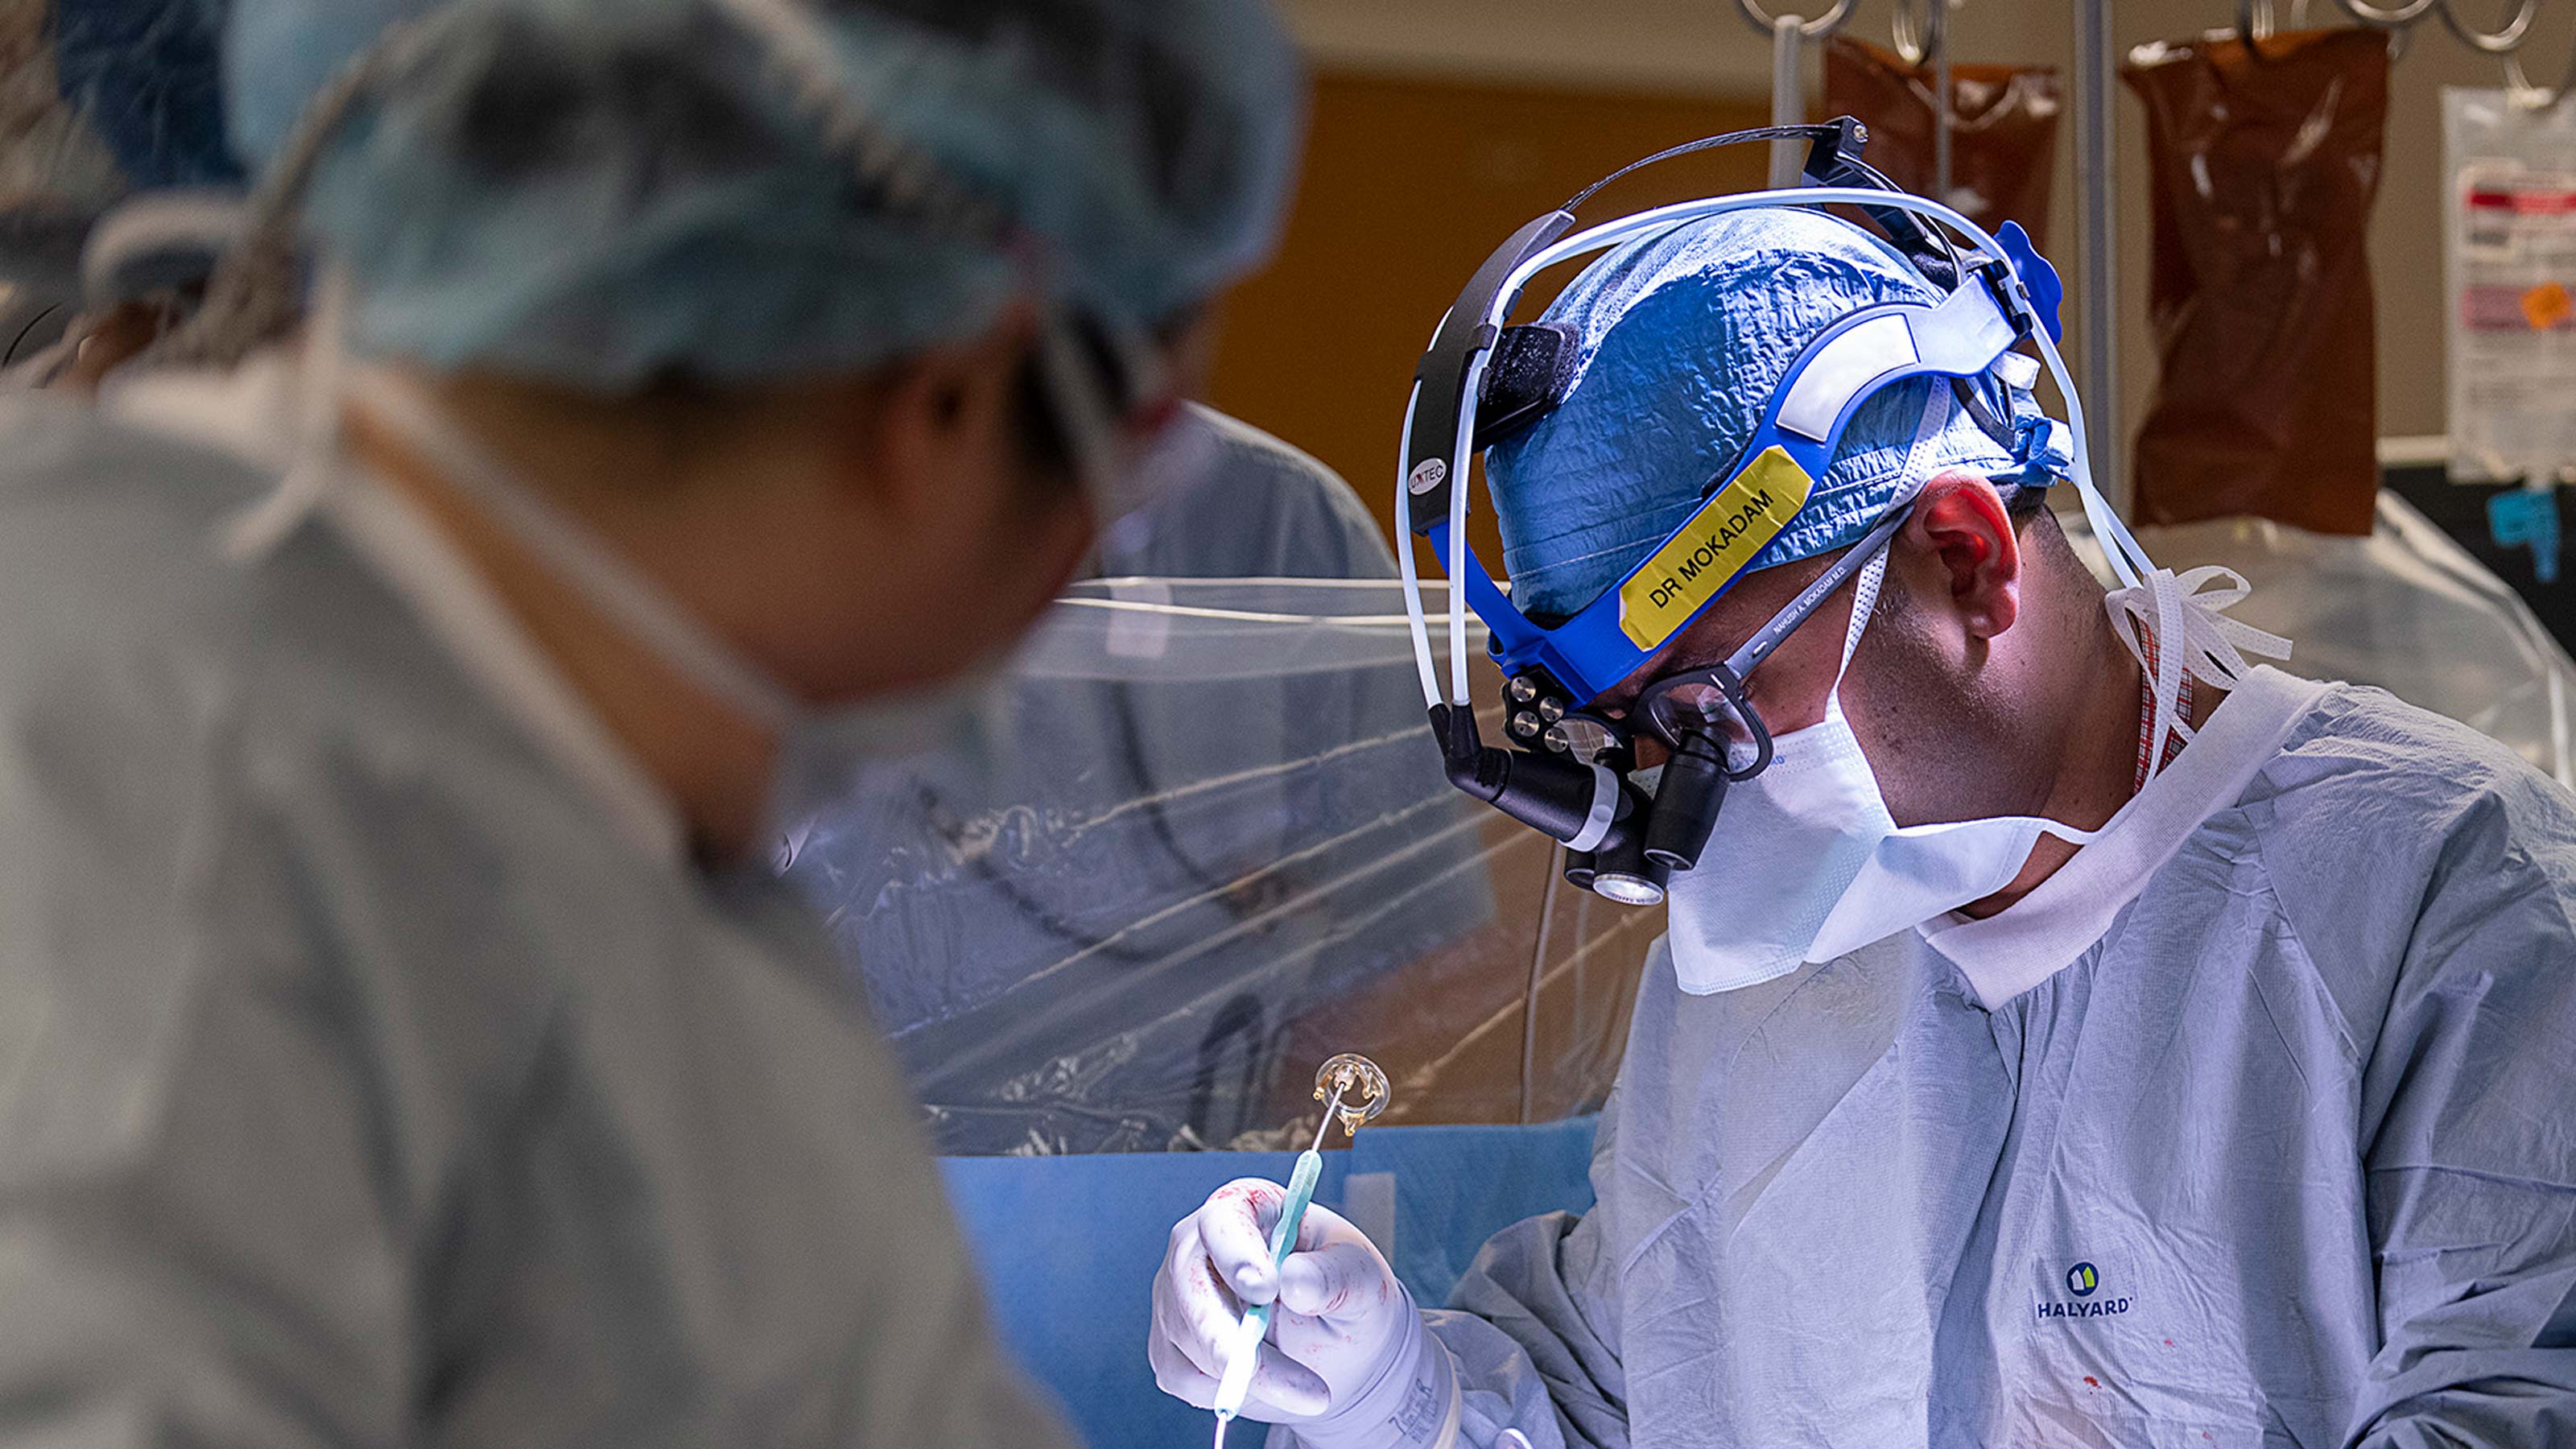 Bringing advanced approaches to improve the lives of cardiac surgery patients